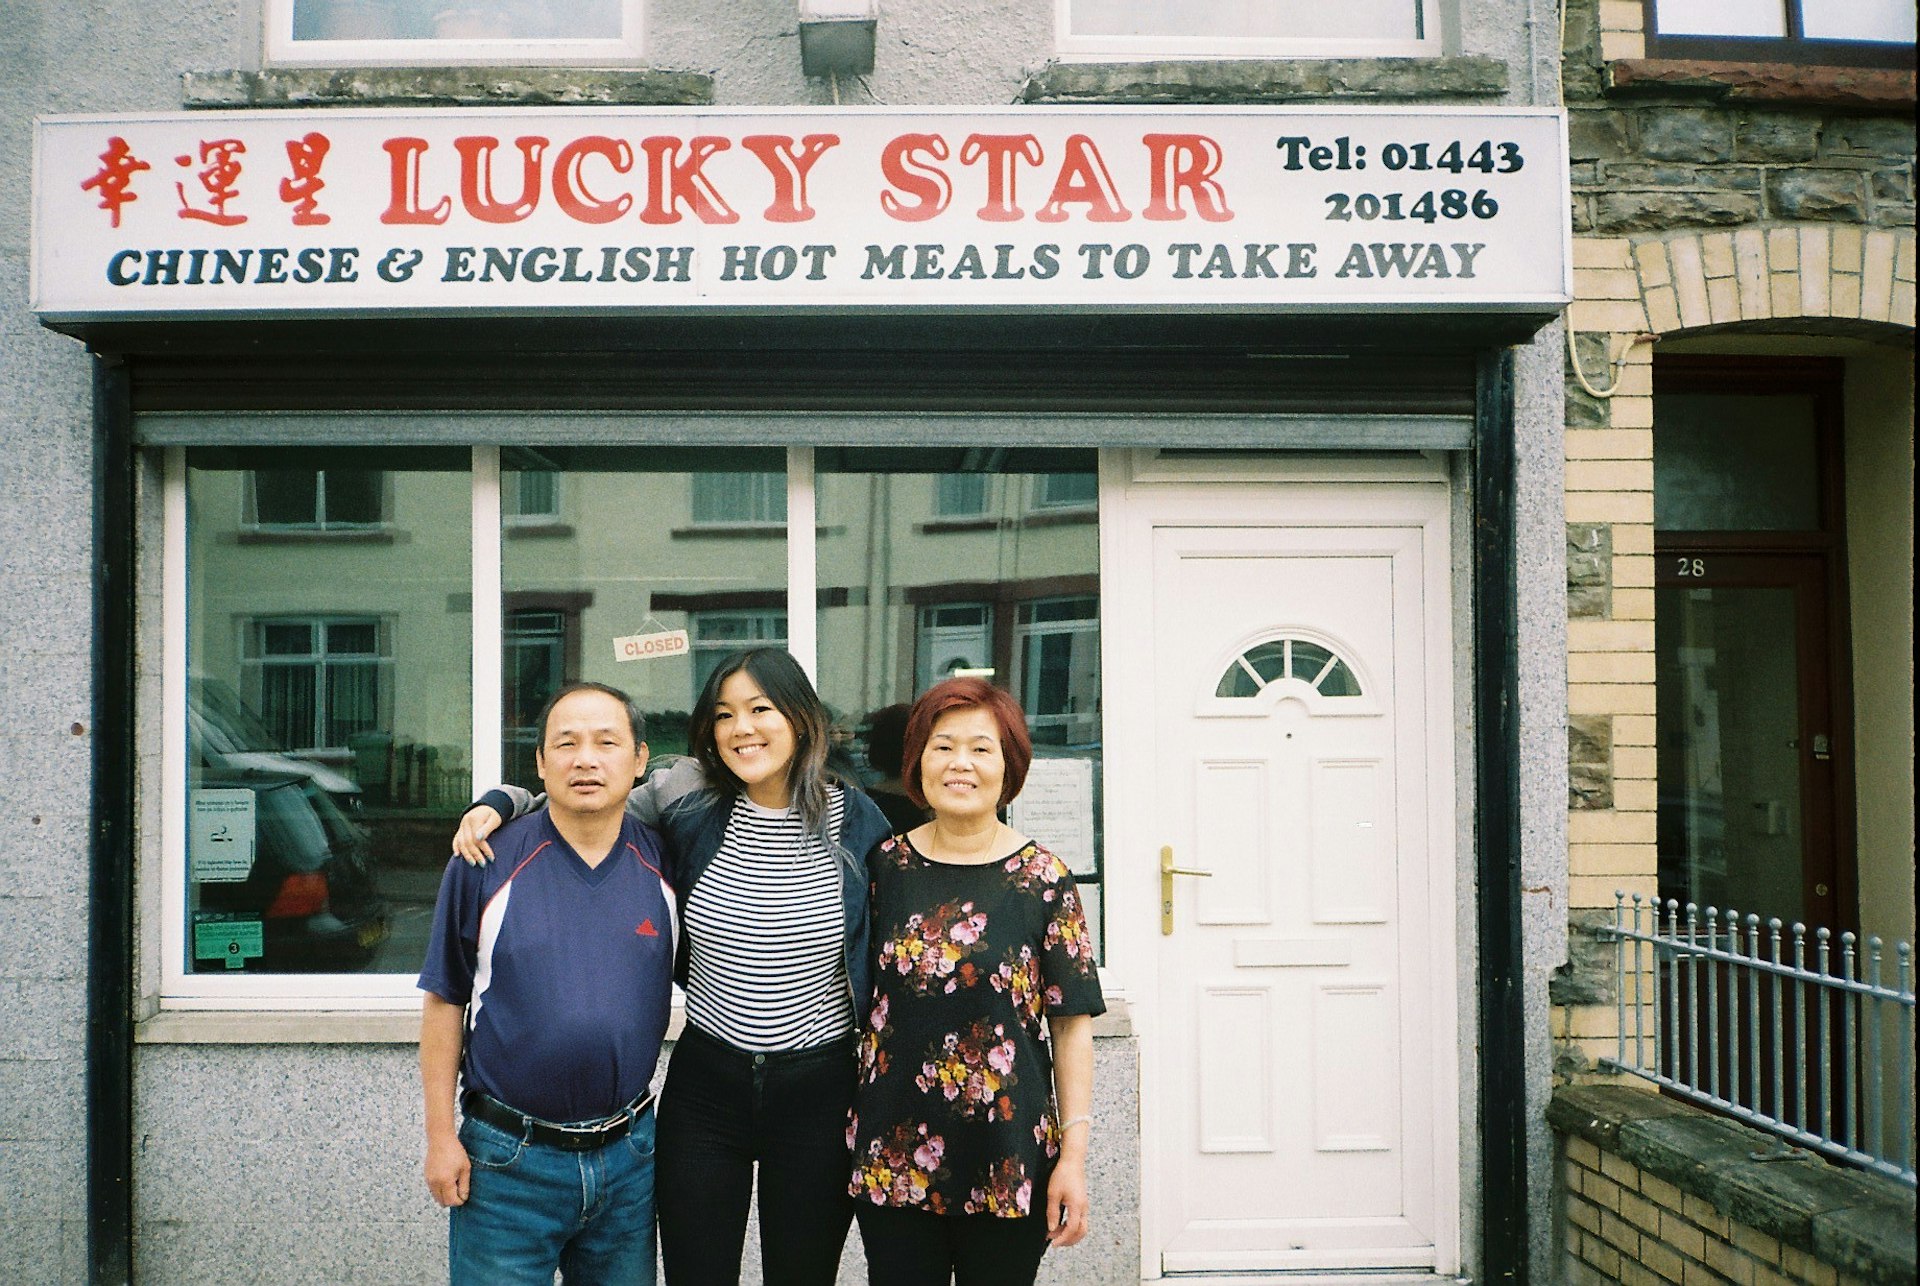 Growing up behind the counter of a Chinese takeaway in Wales